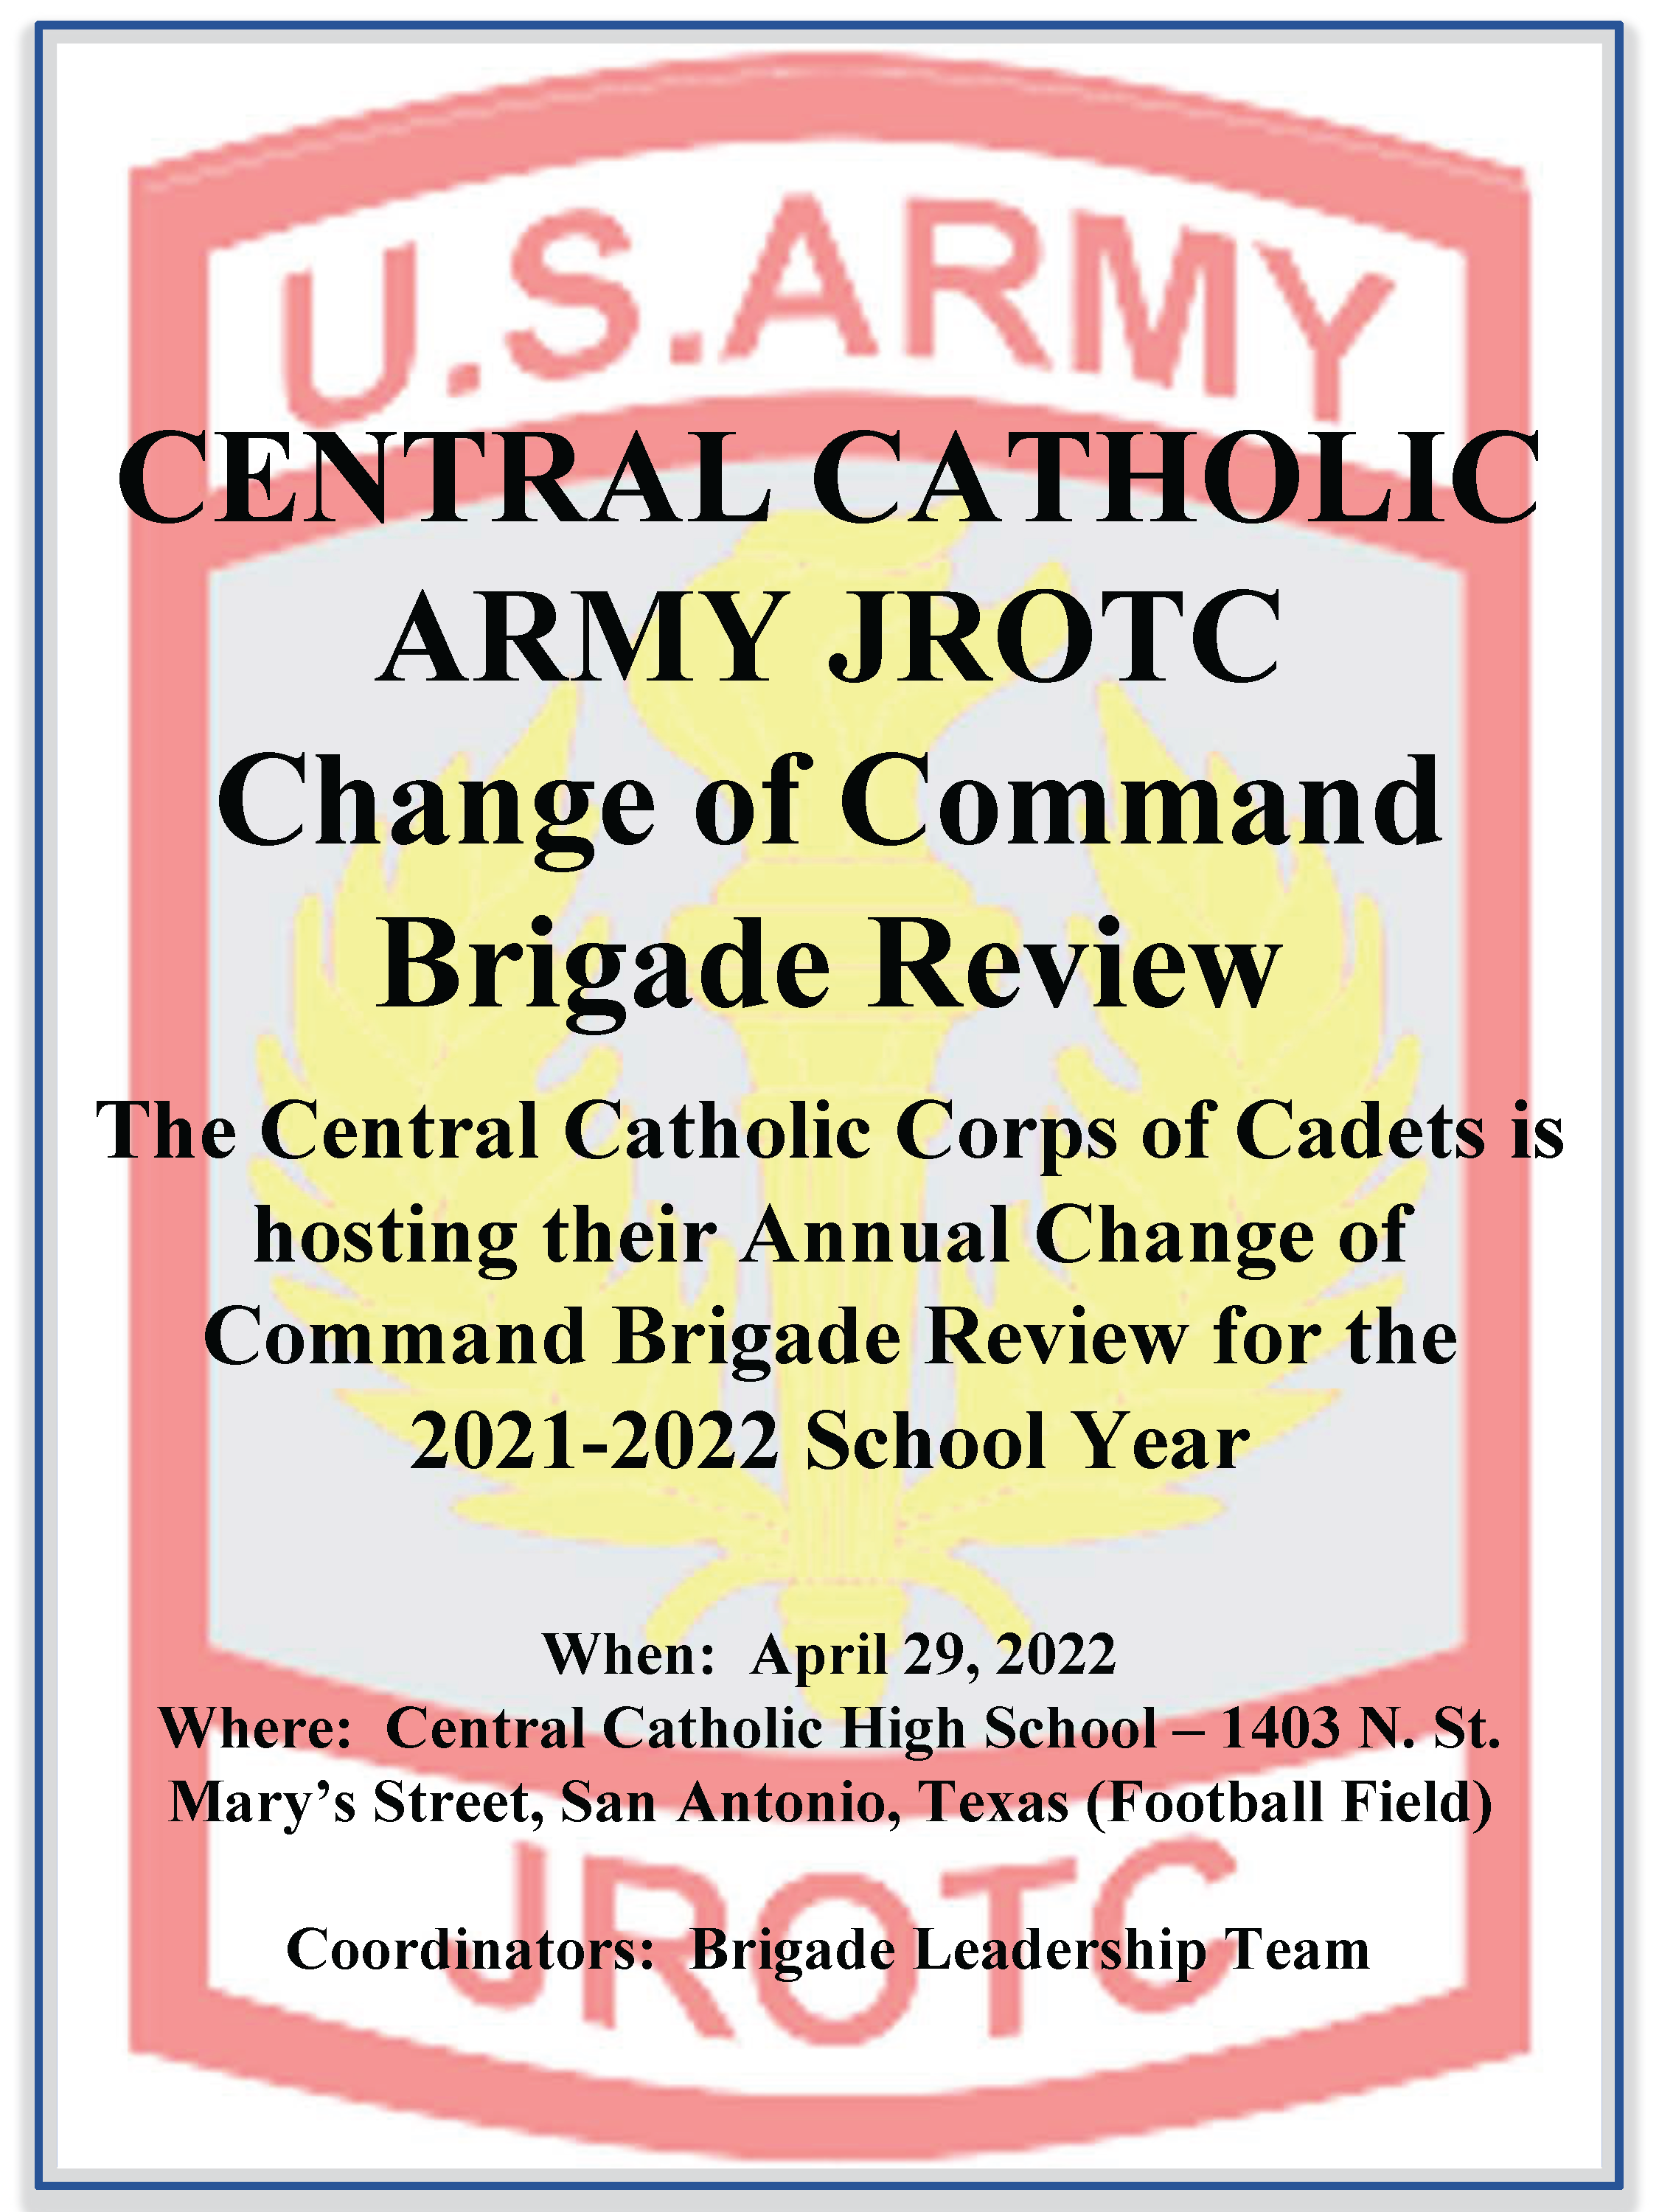 JROTC Chain of Command (Brigade Review)